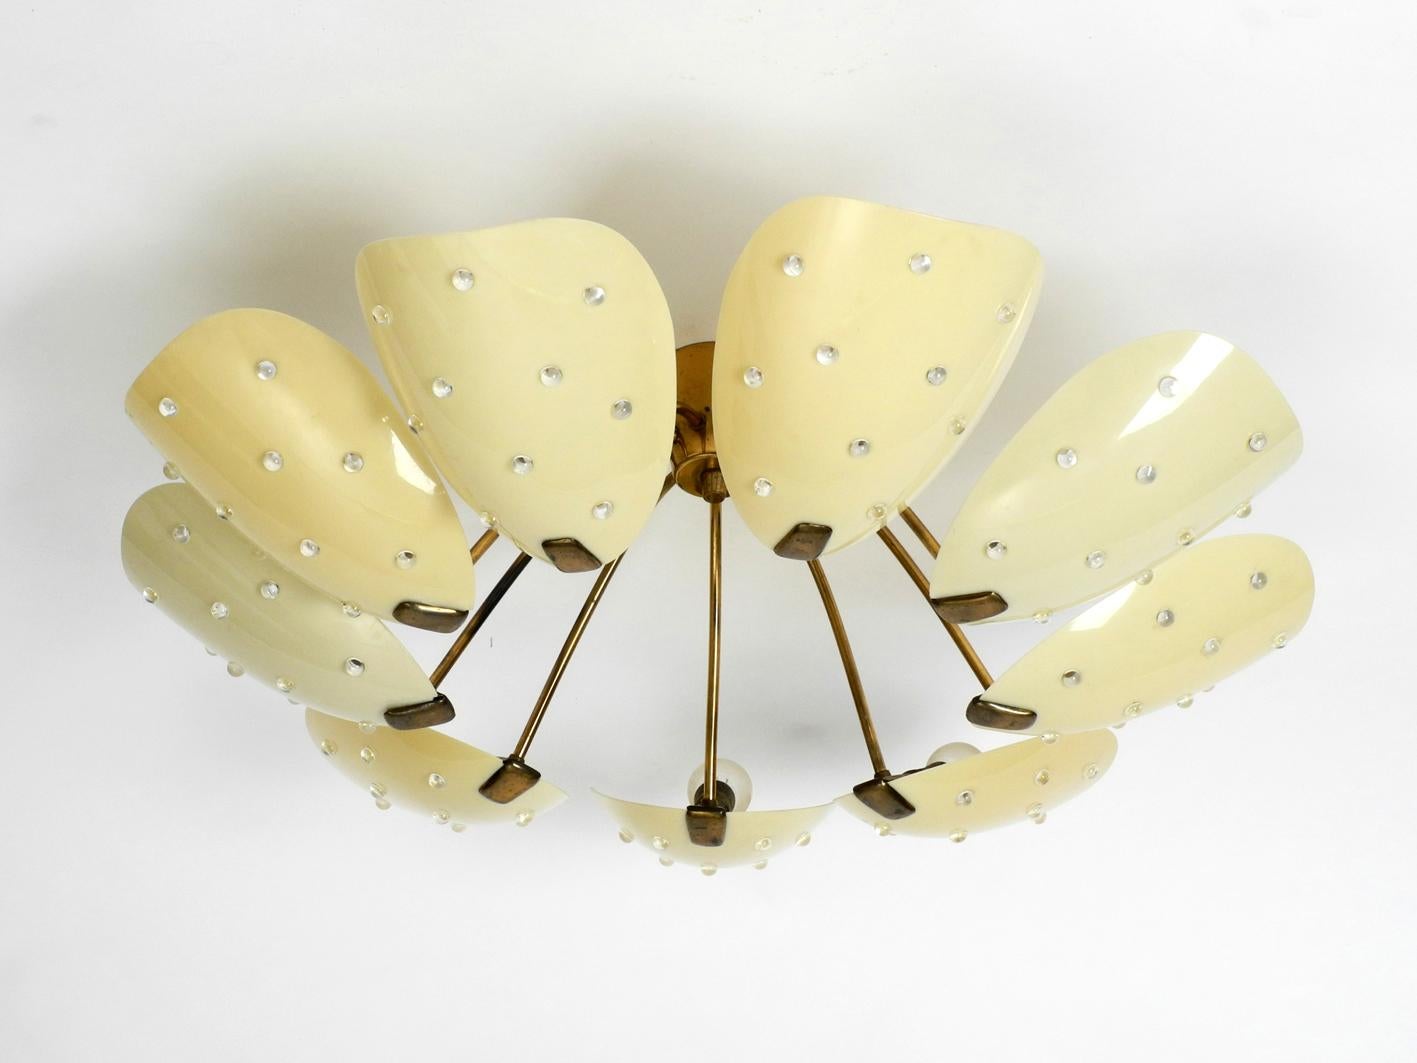 Beautiful gigantic nine-arm, very rare midcentury brass chandelier with plexiglass shades.
Elaborate very high-quality design from the 1950s.
Frame, canopy and original sockets made of brass. The shades have small transparent stones as inlays.